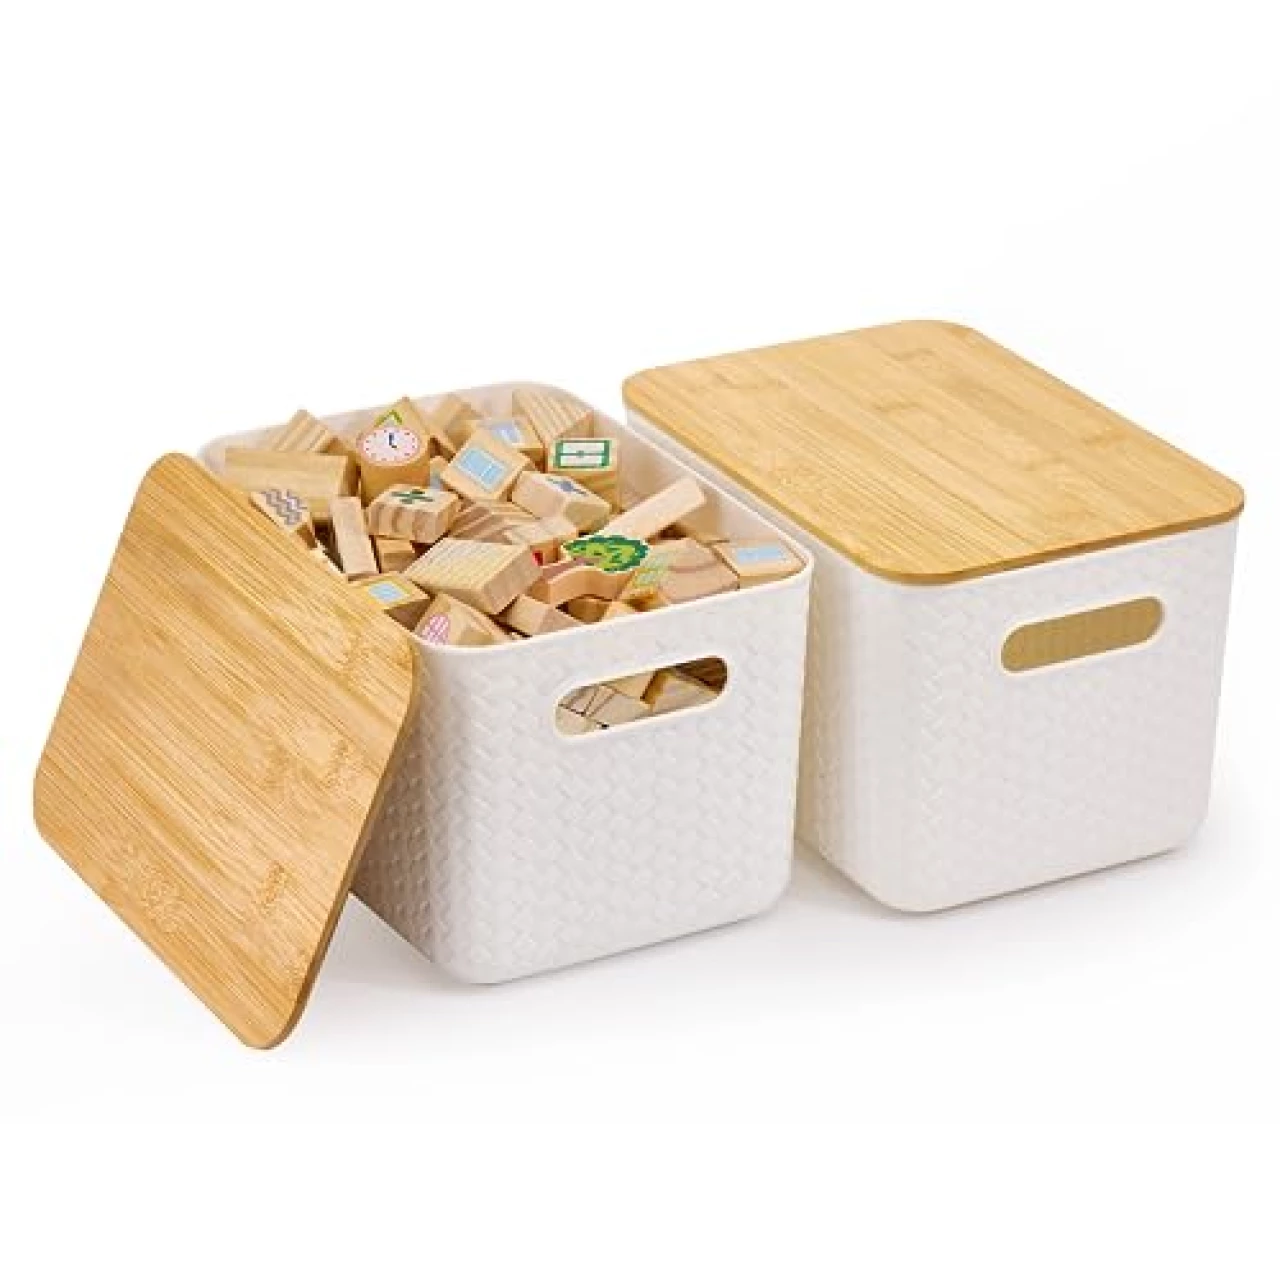 2 Packs Storage Bins with Bamboo Lids - Plastic Storage Containers with Lids Stackable Storage Box: Storage Baskets for Organizing Desktop Closet Playroom Classroom Office, White